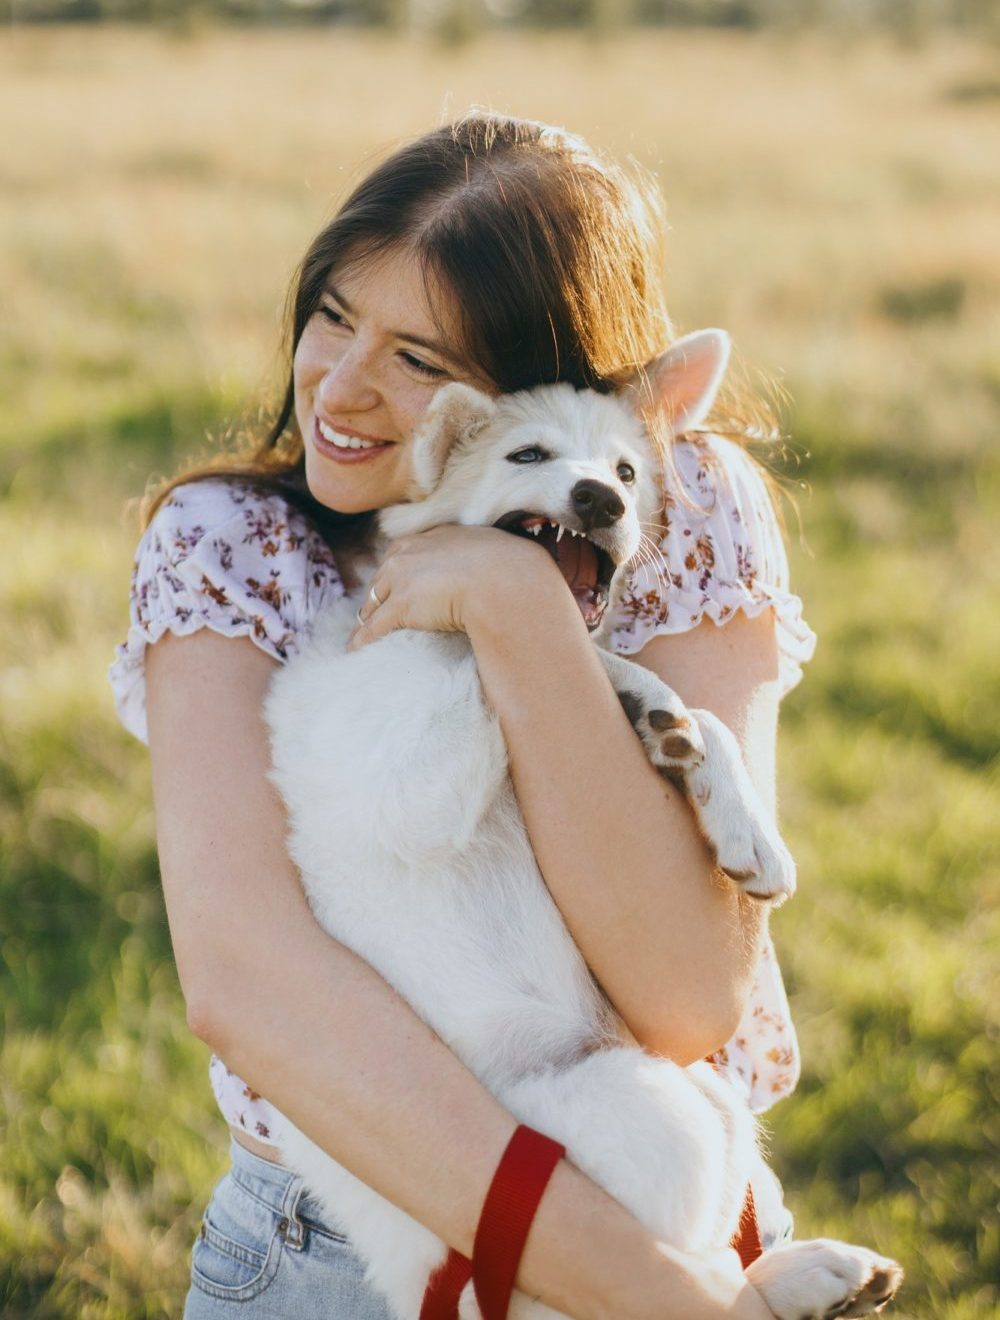 Stylish young woman hugging cute white puppy in warm sunset light in summer meadow